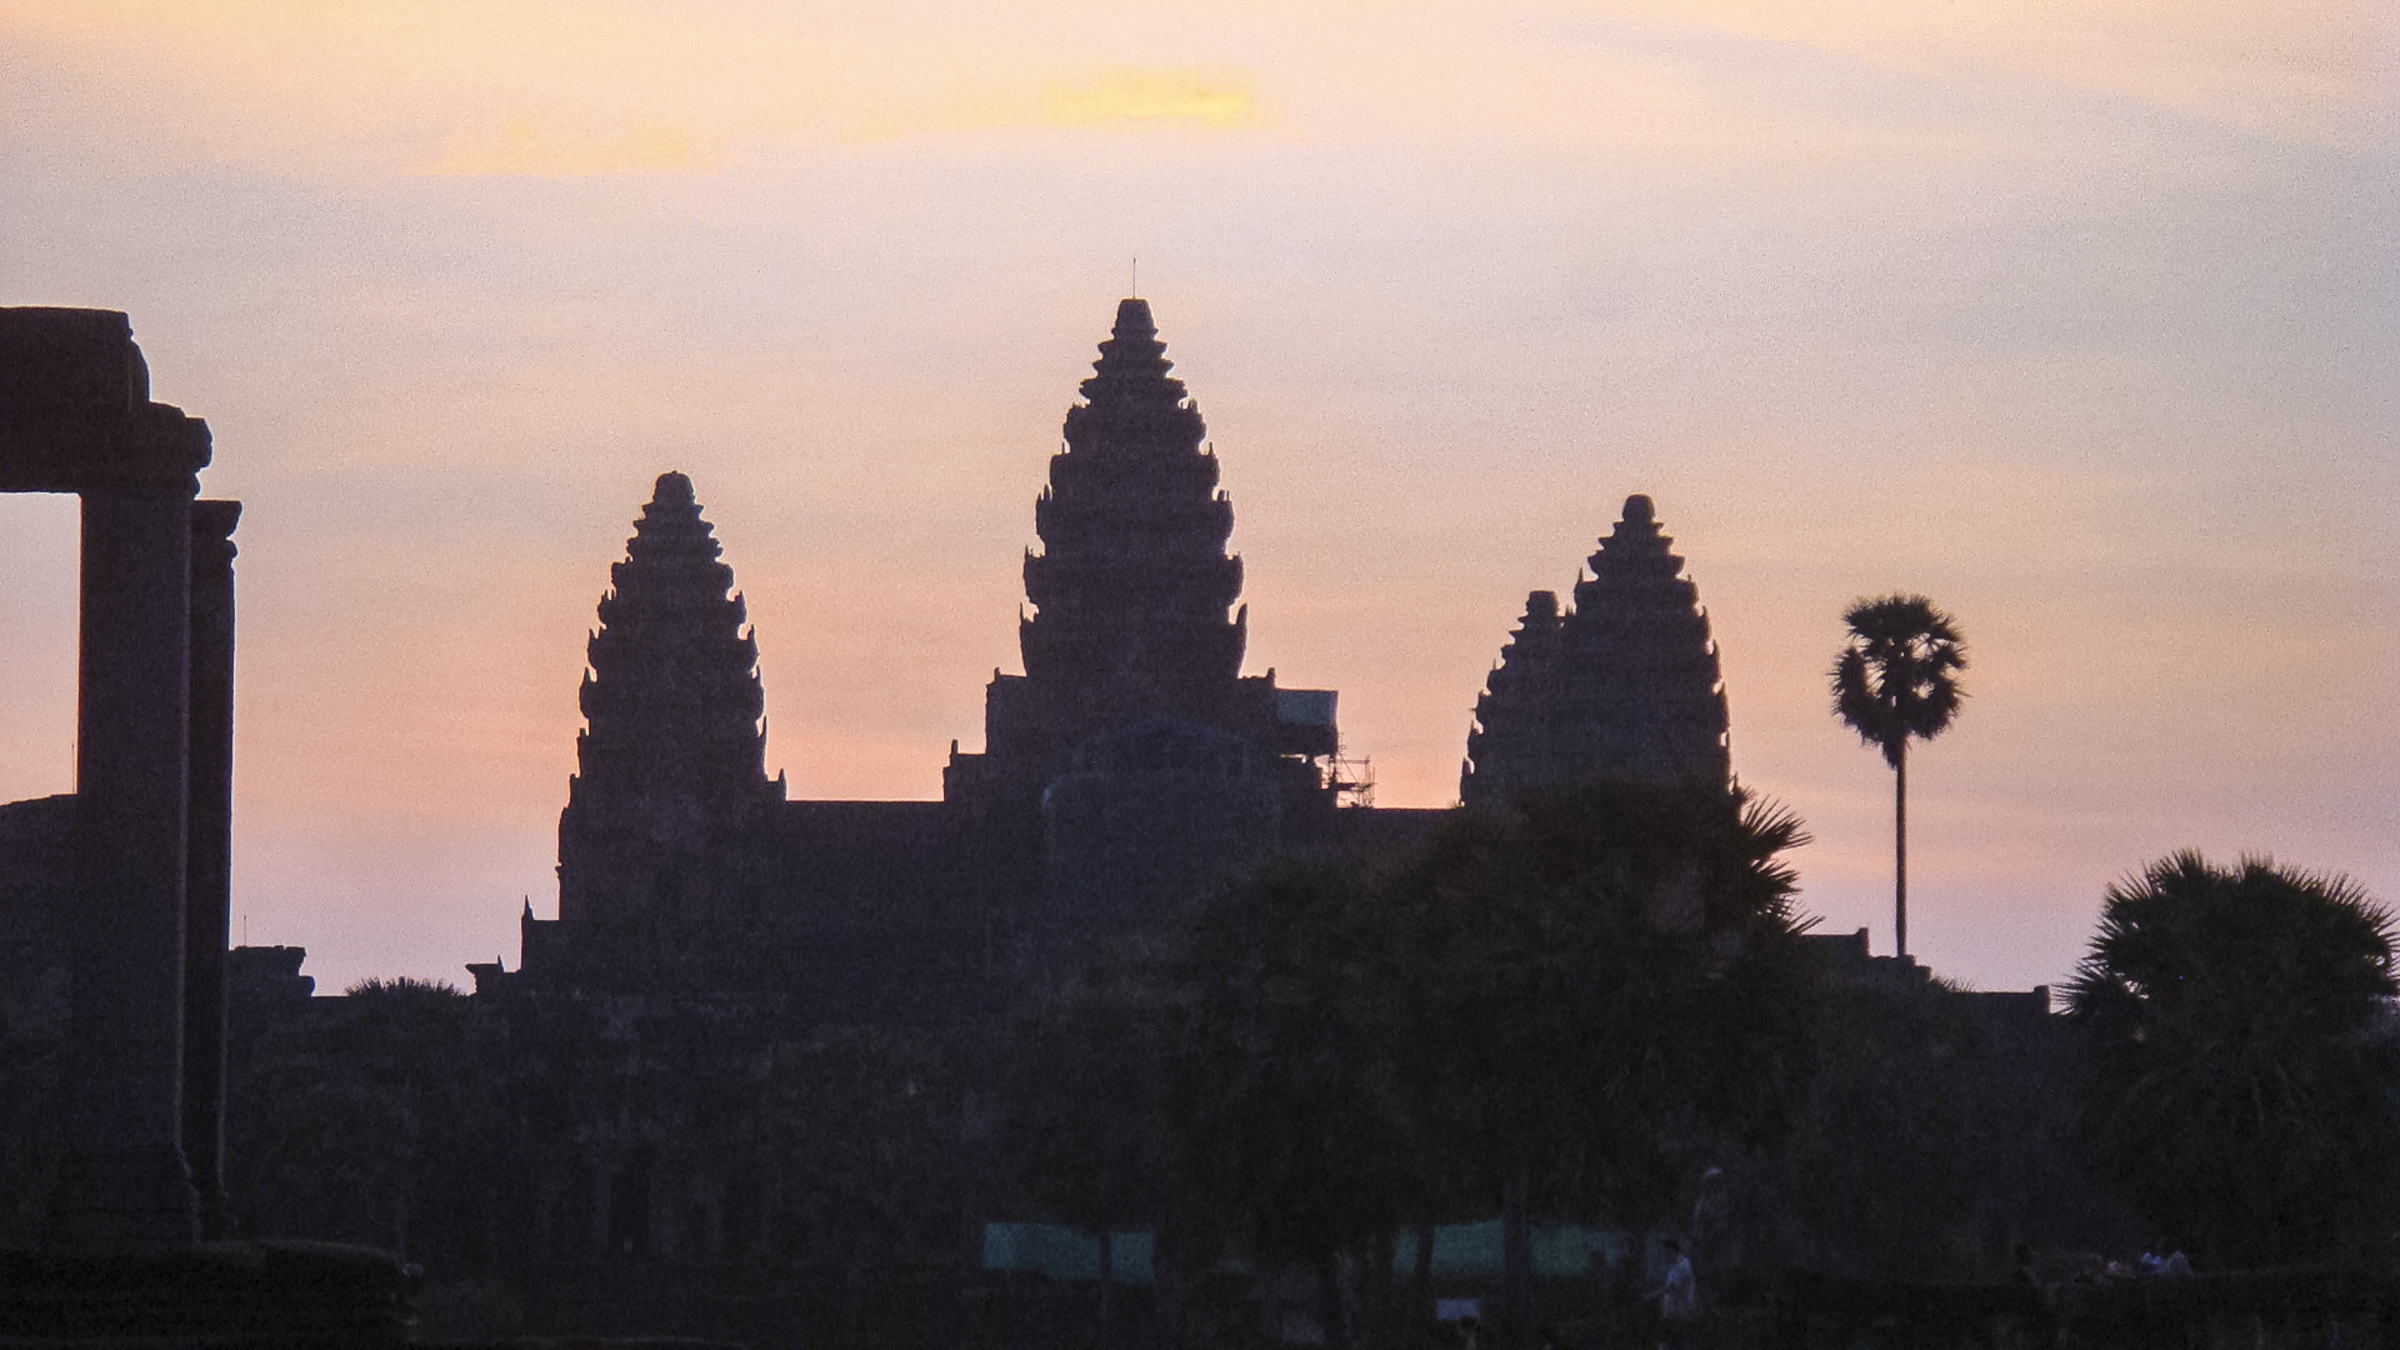 photo tips of shooting silhouettes in Cambodia